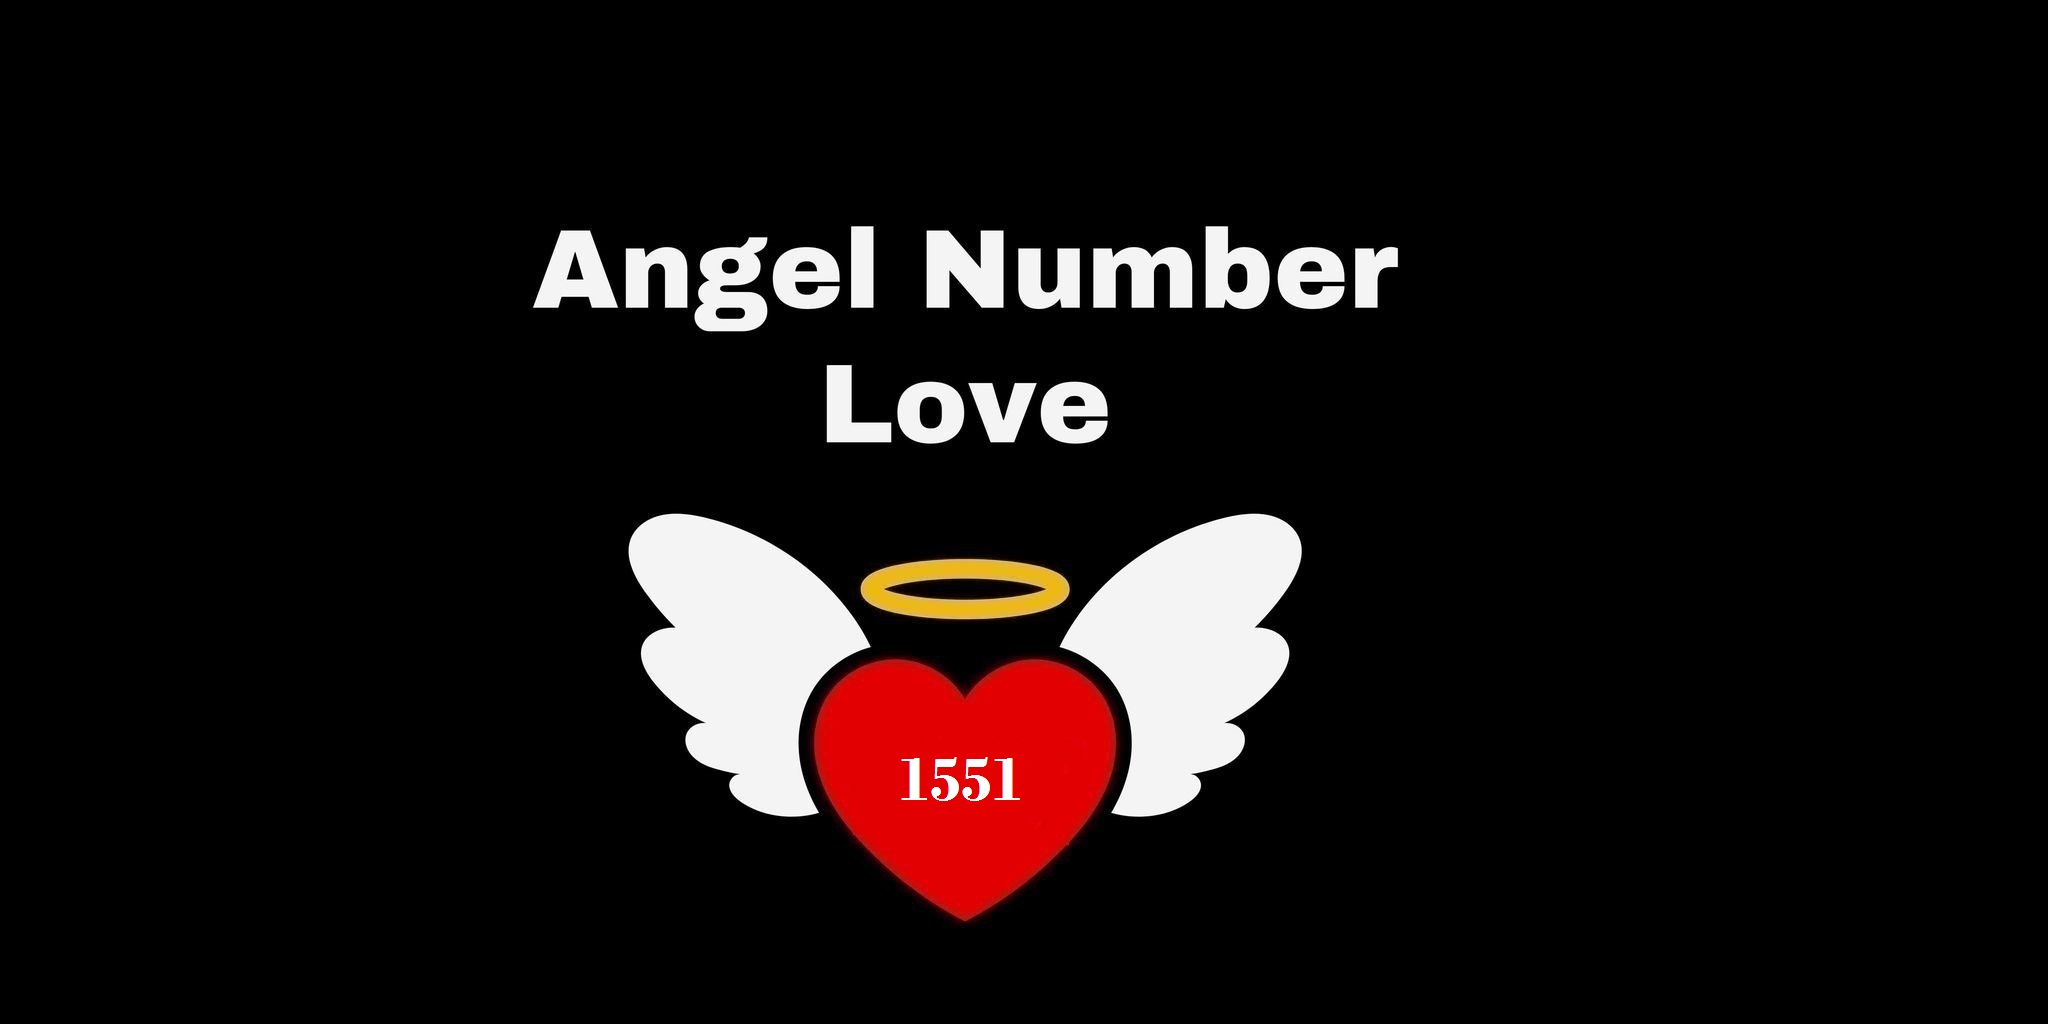 1551 Angel Number Meaning In Love